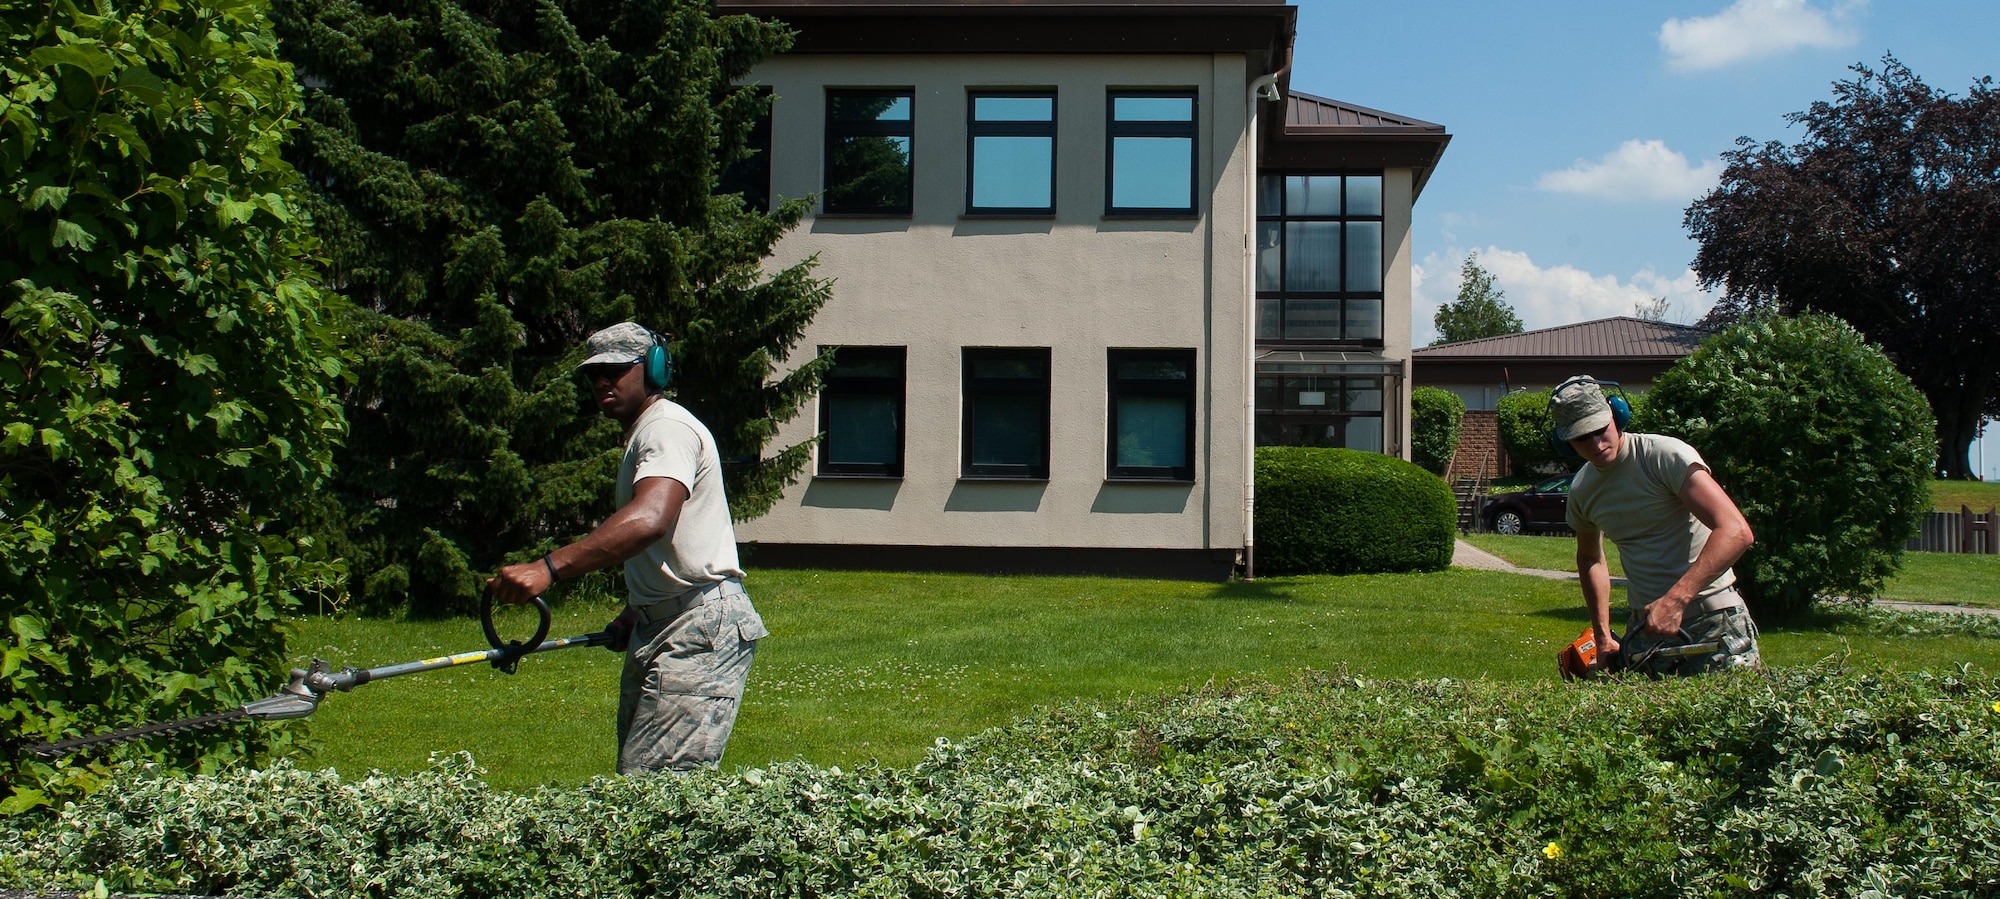 Senior Airman Pascal Dieujuste and Airman 1st Class Daniel Collins, 786th Civil Engineering Squadron heavy equipment operatiors, pavement and construction specialist journeymen, trim bushes around Ramstein Air Base, Germany, June 24, 2016. Throughout the year, Ramstein maintains its high standard of cleanliness through the help of Airmen from the 786th CES and other squadrons maintaining base morale. (U.S. Air Force photo/Airman 1st Class Lane T. Plummer)